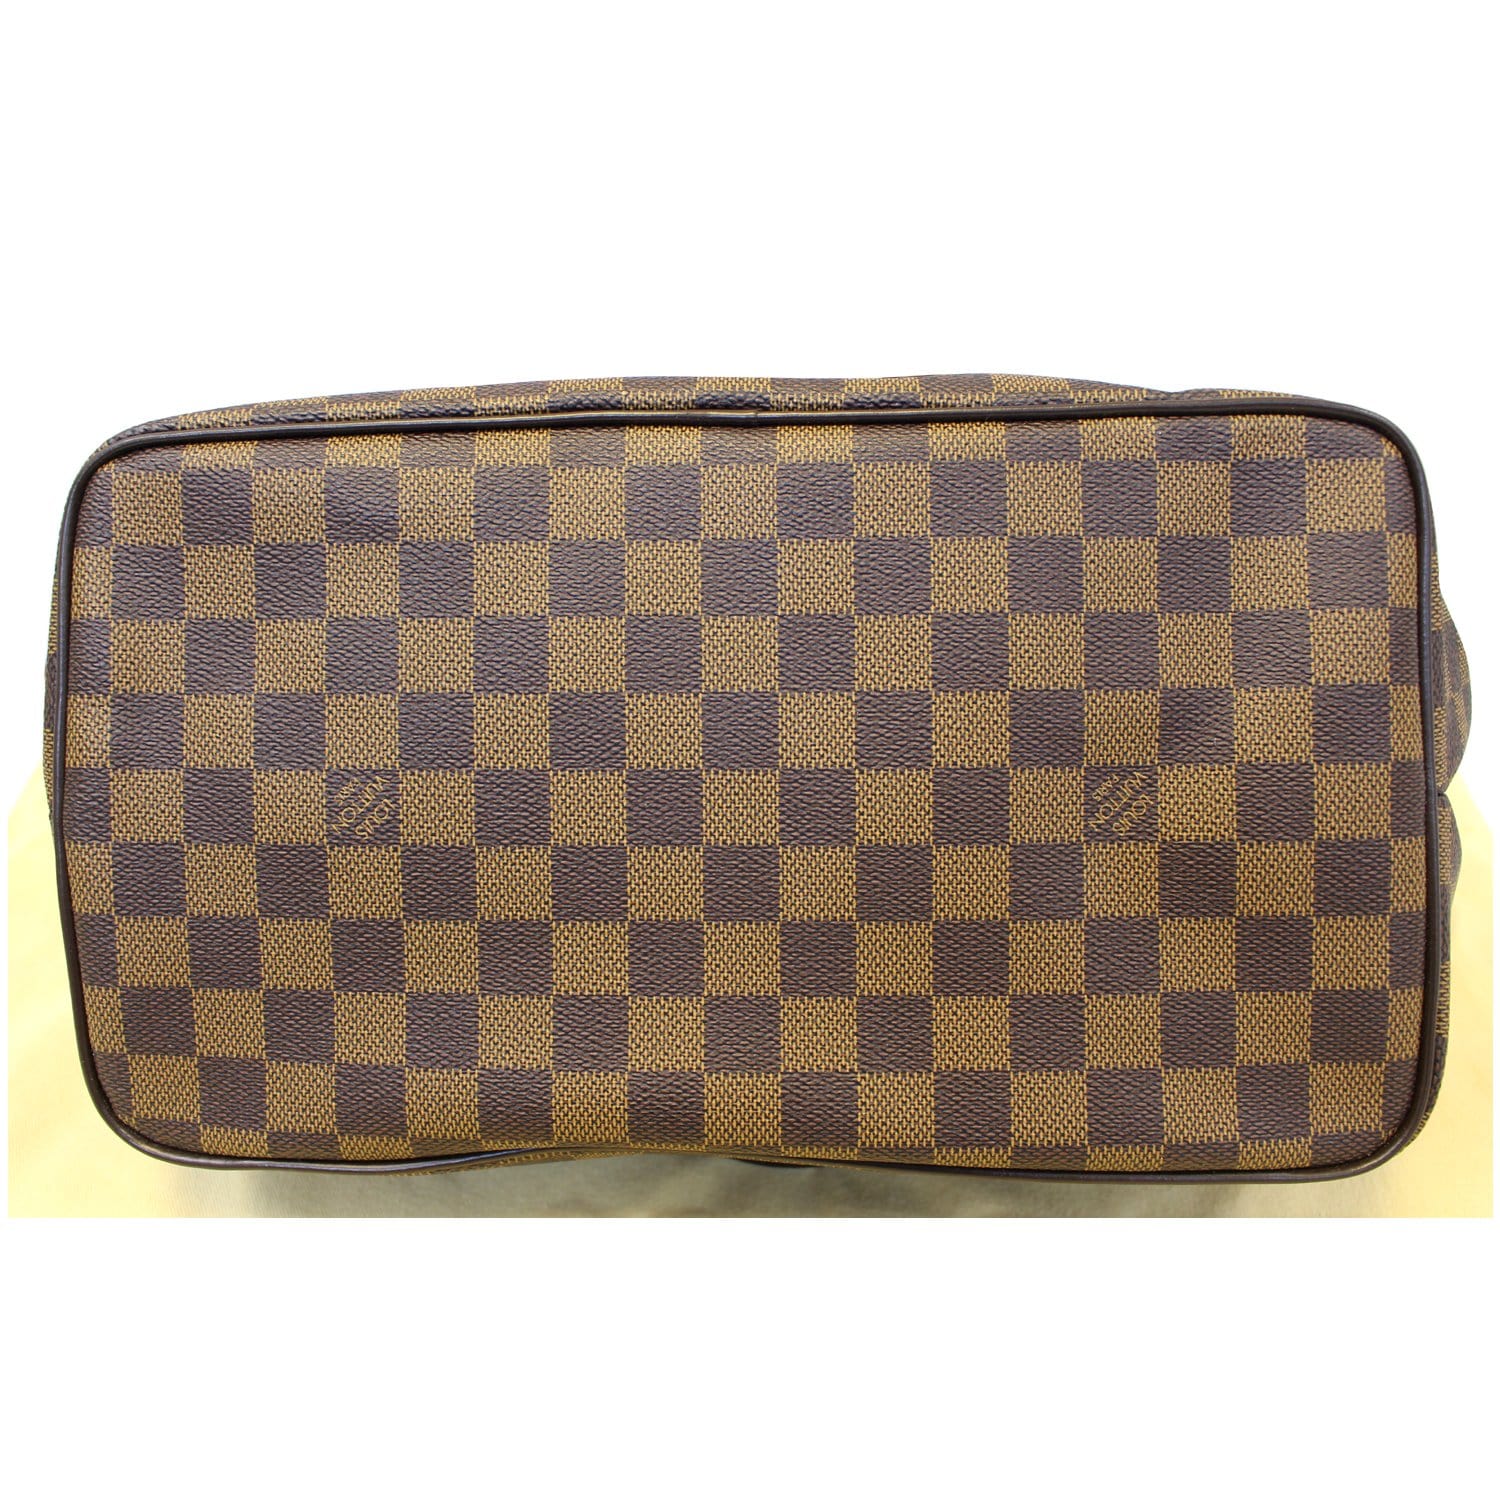 Brandname PM - Used like new Lv westminster pm damier